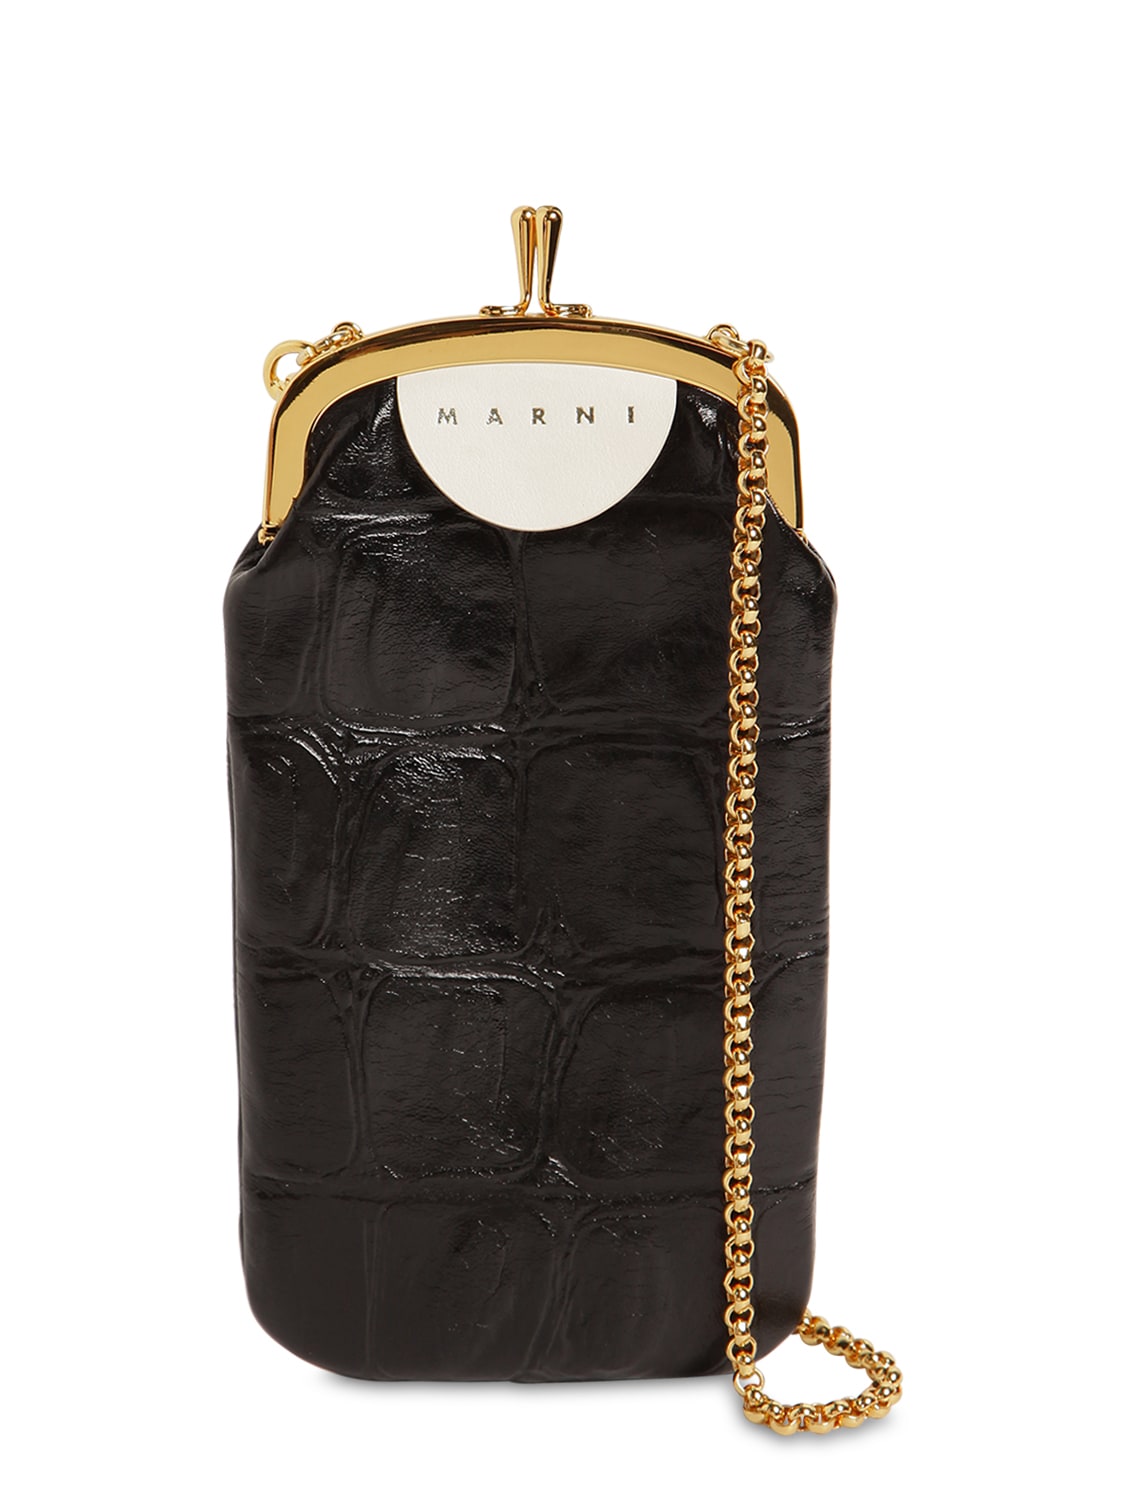 Marni Croc Embossed Leather Phone Case In Black